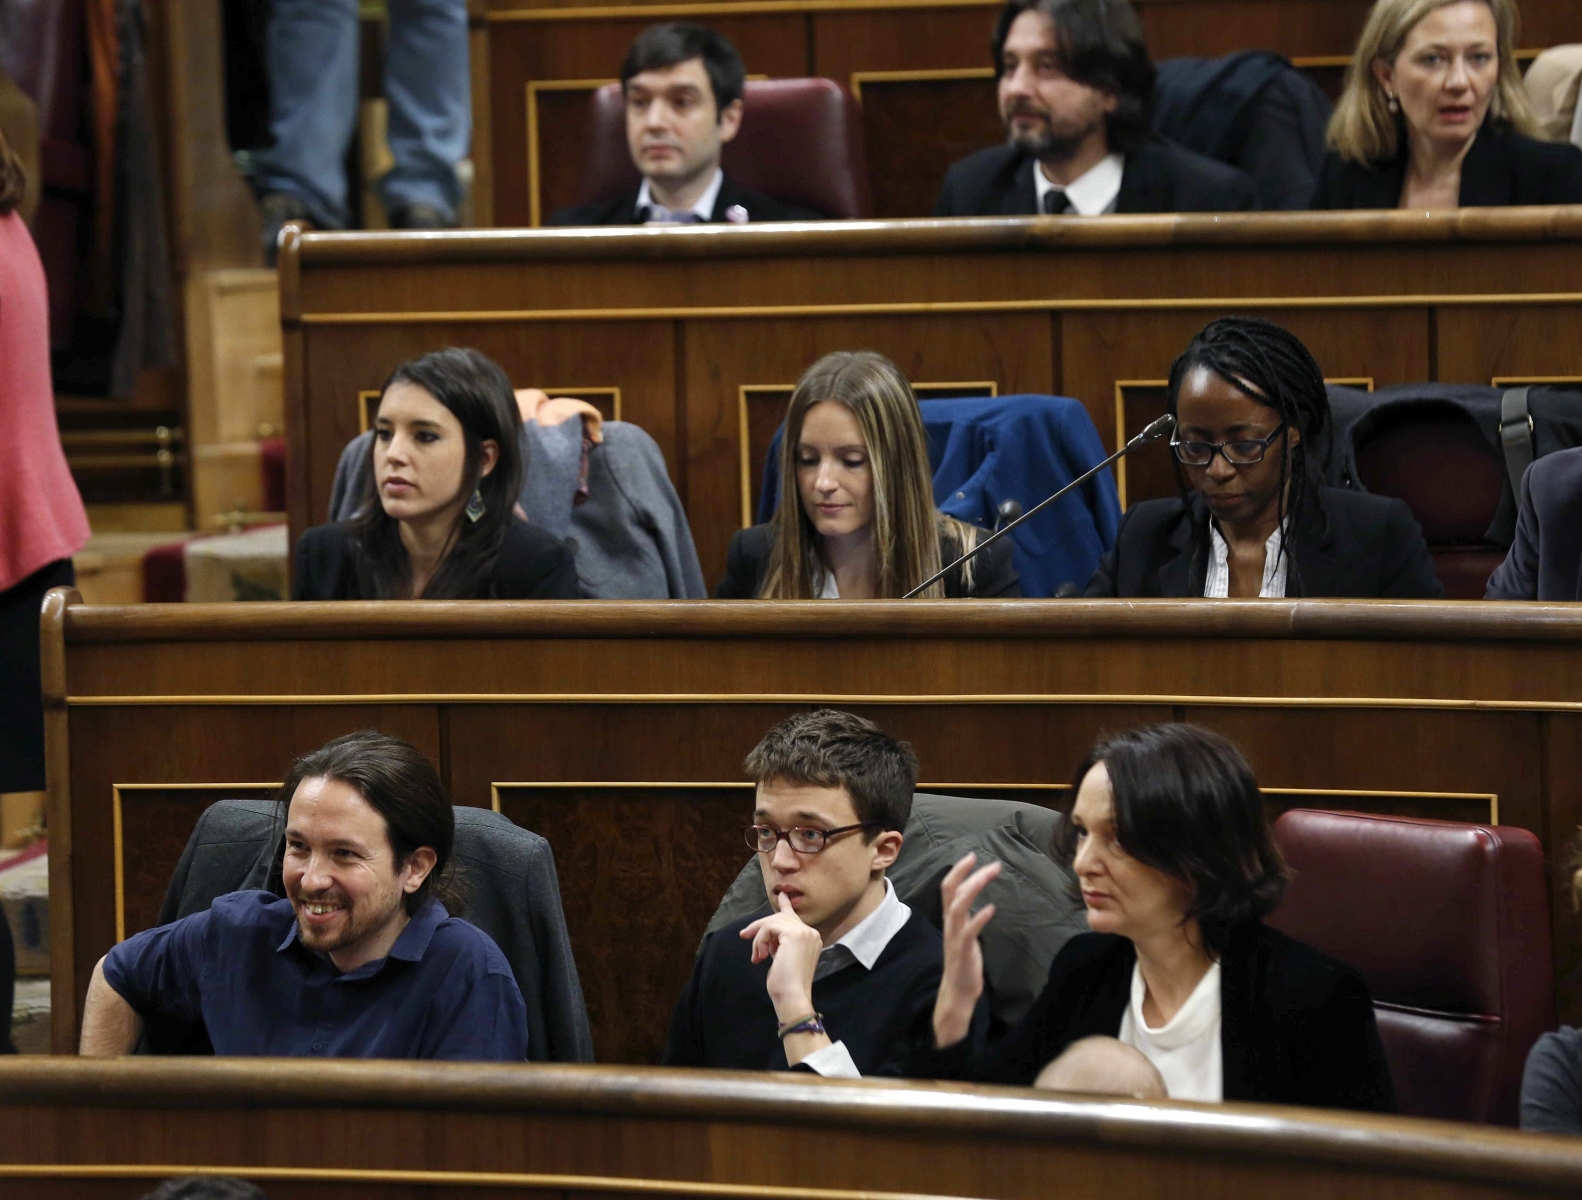 epa05099748 Podemos party MPs (L-R, first row) Pablo Iglesias, Inigo Errejon, Carolina Bescansa (L-R, second row) Irene Montero, Angela Ballester, Rita Bosaho (L-R, third row) Pablo Bunstinduy, Rafael Mayoral and Victoria Rosell attend the formation session of the Lower Chamber in Madrid, Spain, 13 January 2016. The Spanish Parliament celebrated the opening of the 11th term of office of the country's Democracy. Spanish socialist party and Ciudadanos party agreed the previous day to choose the election of socialist MP Patxi Lopez as the President of the Lower Chamber, while the People's Party has decided not to present a candidate as a step forward to a future agreement with the socialist party towards a coalition to avoid new general elections.  EPA/SERGIO BARRENECHEA SPAIN GOVERNMENT